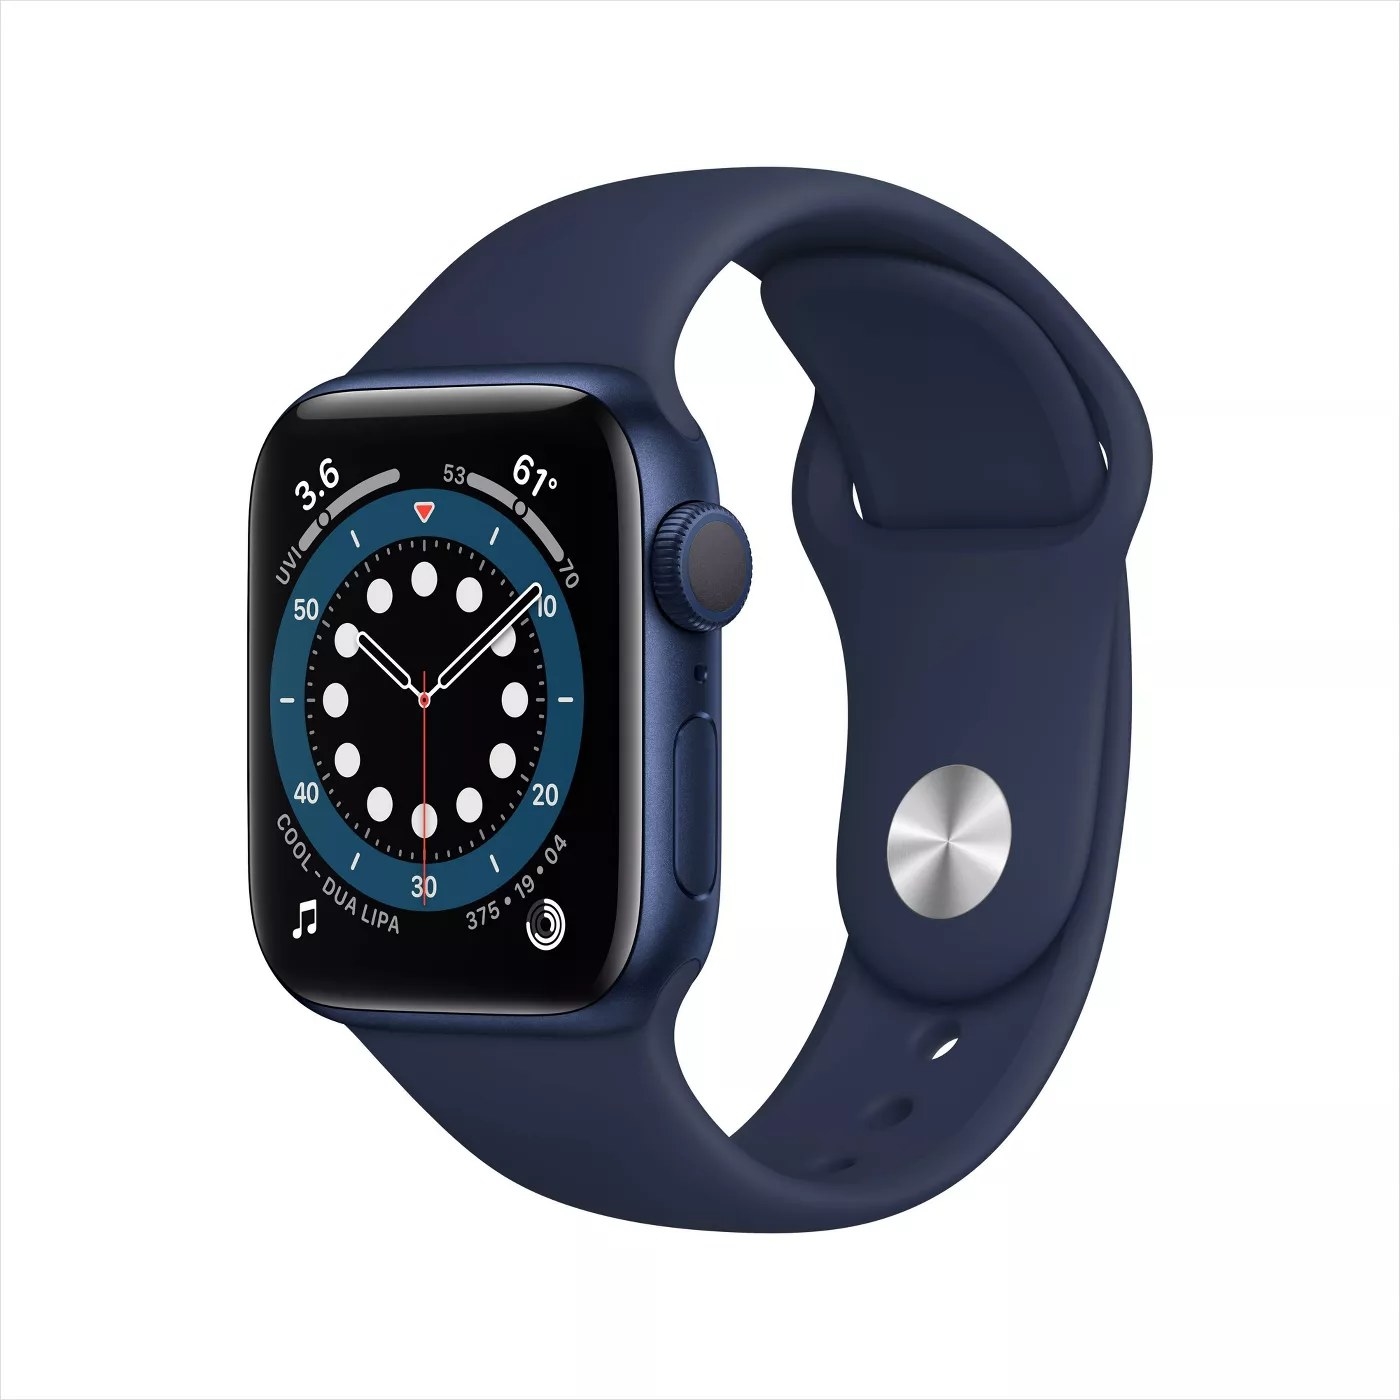 The Apple Watch in navy